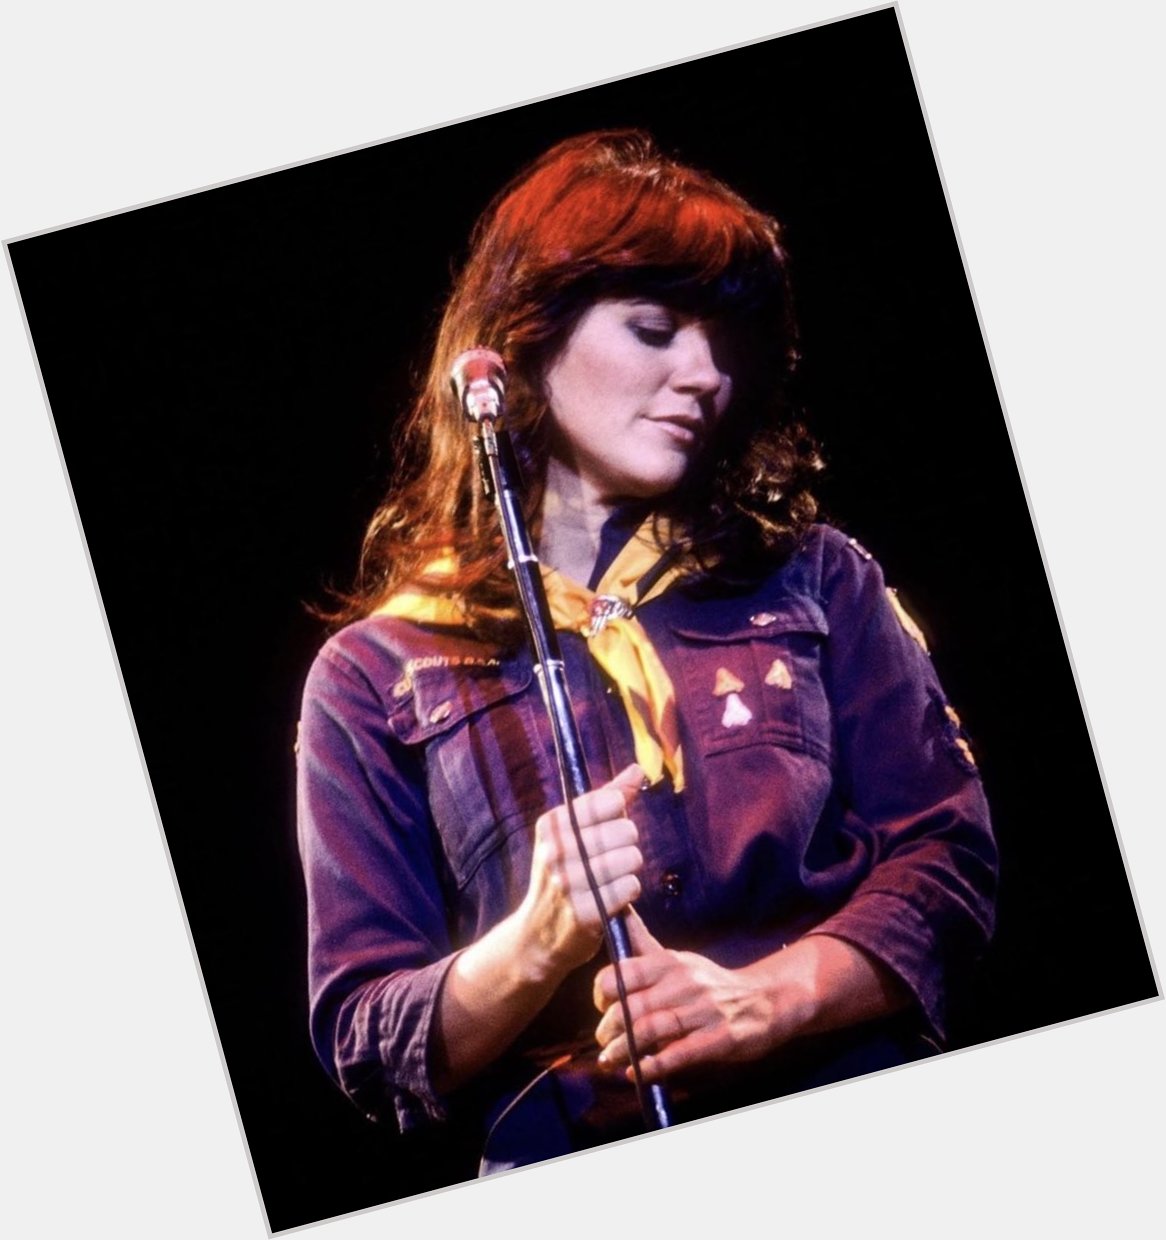 One of my favorites. Happy birthday, Linda Ronstadt. She is a pioneer and a treasure. 